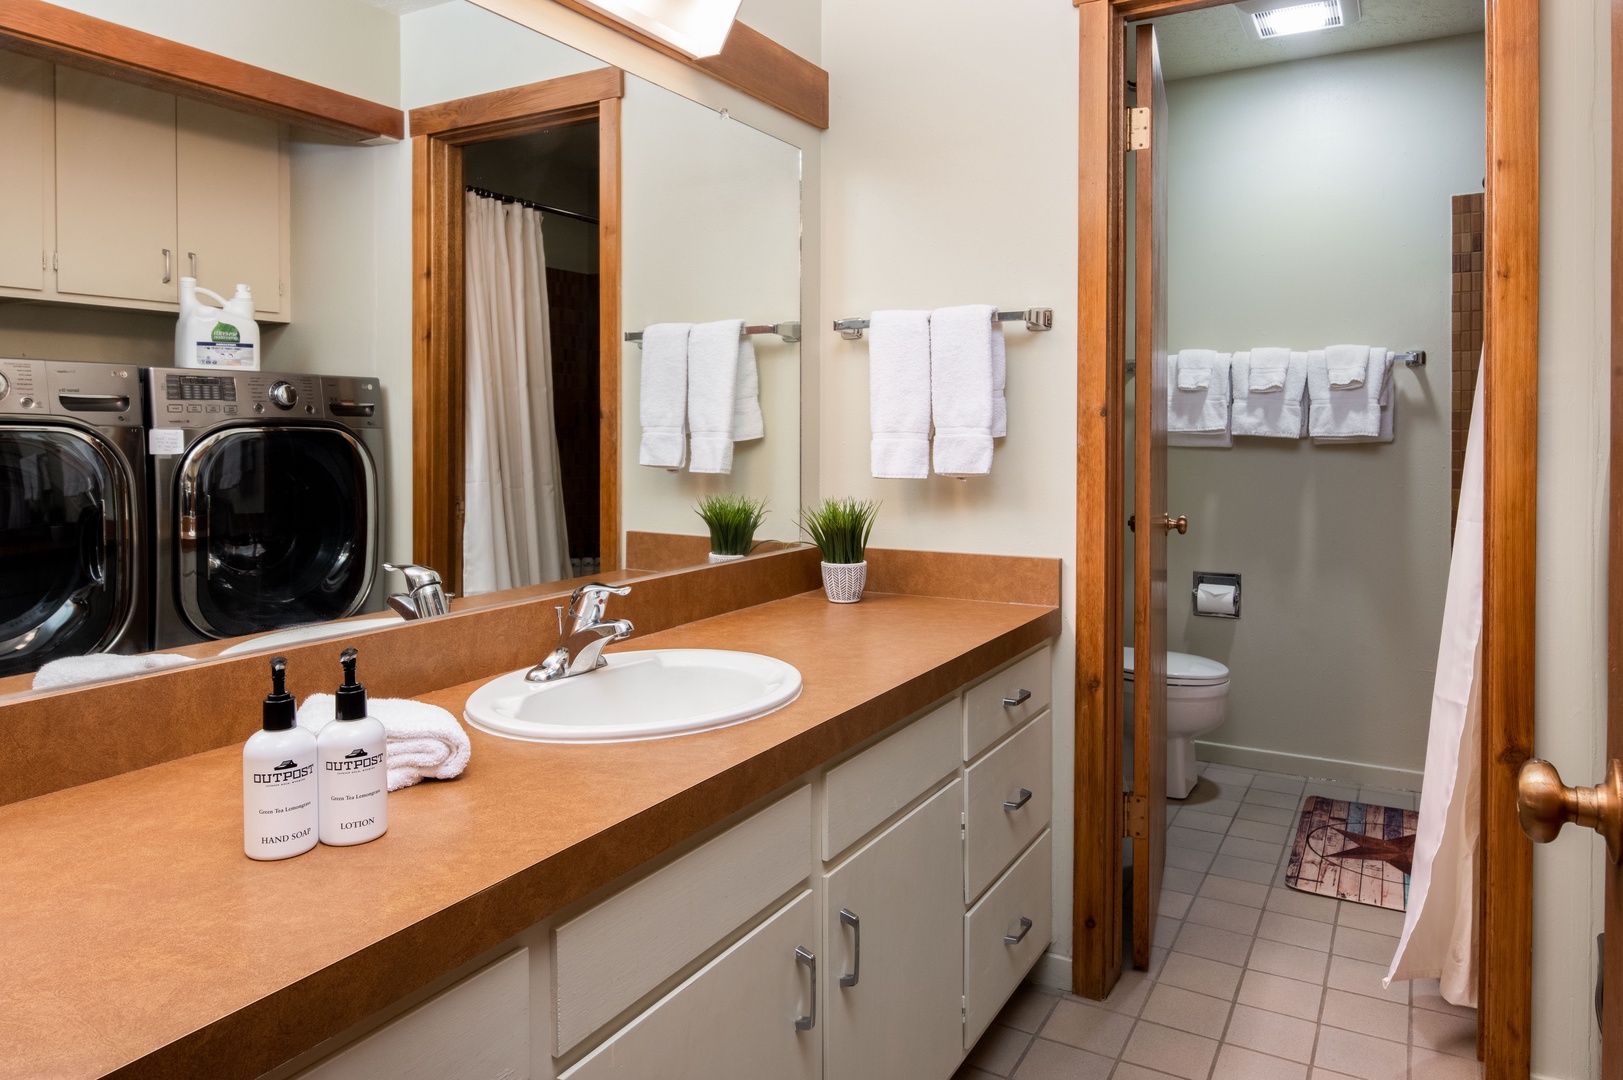 Secondary bathroom with Laundry